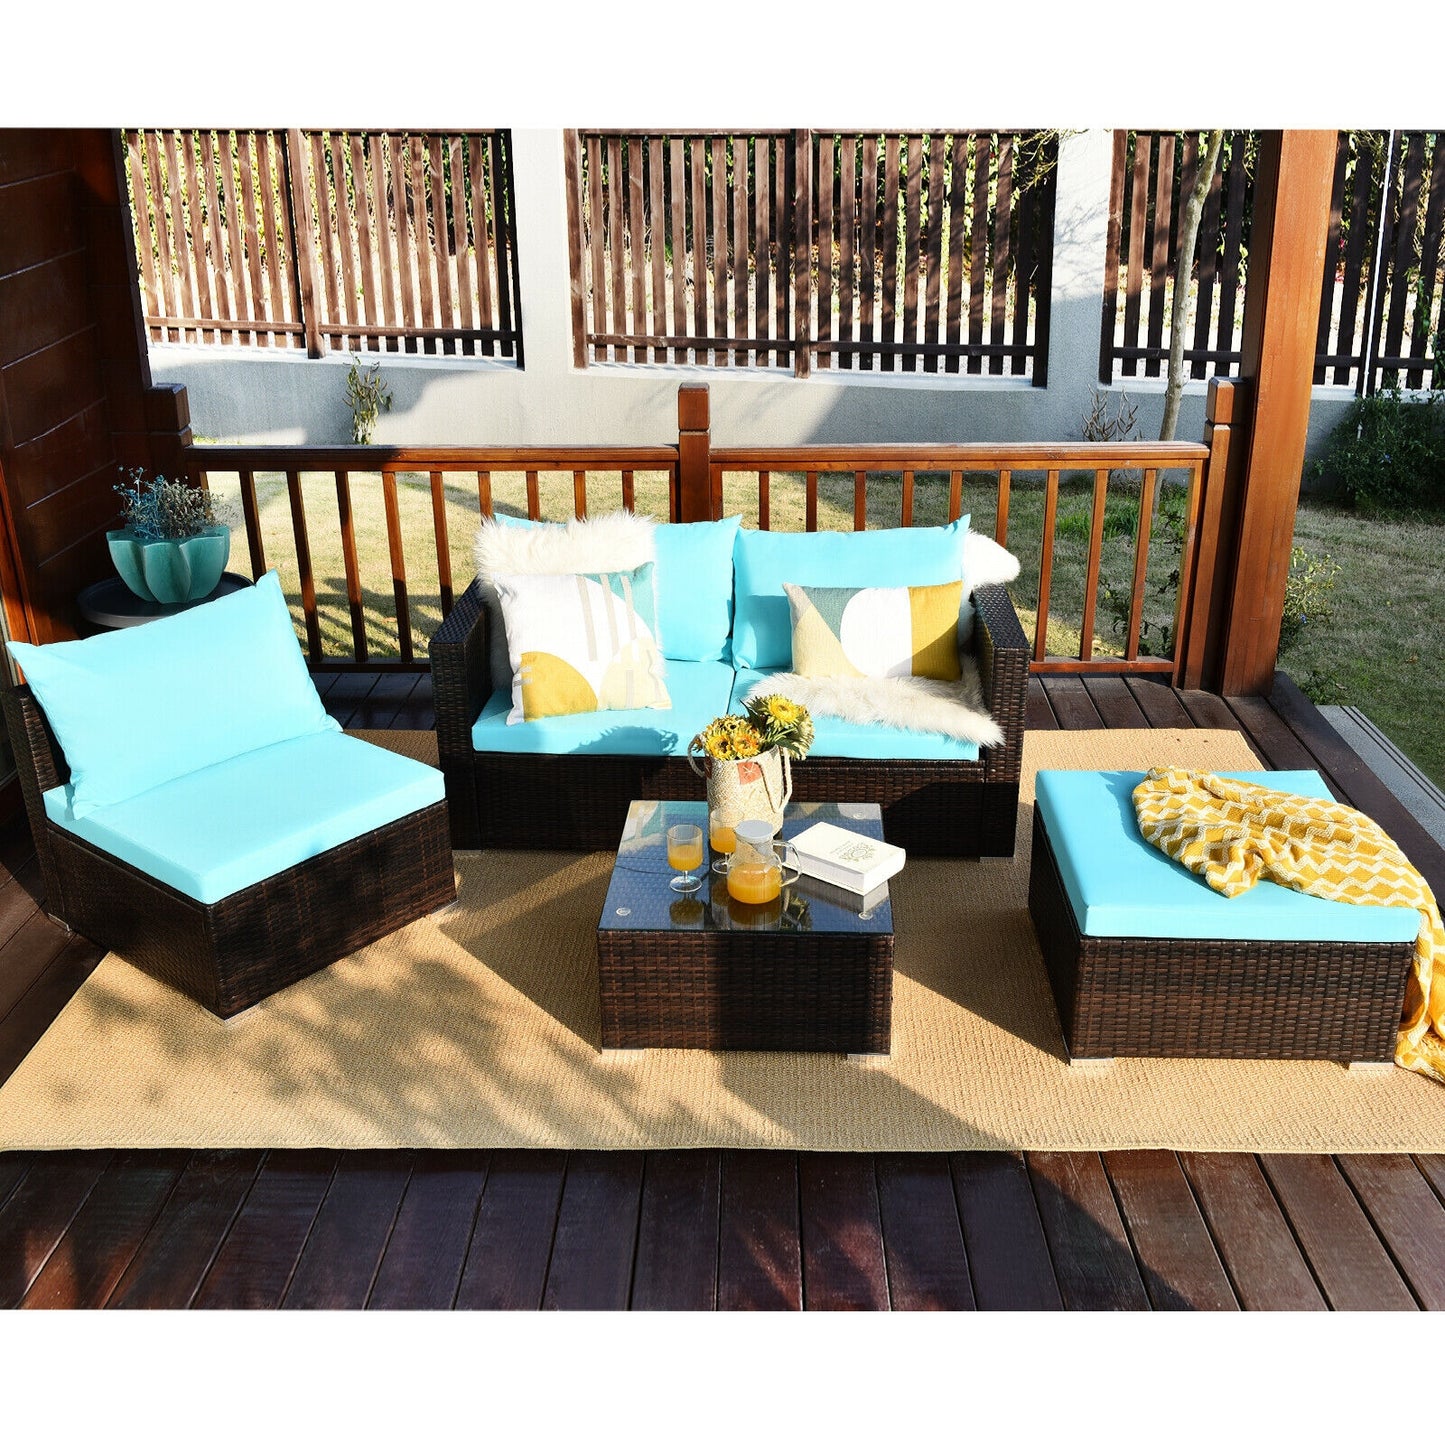 5 Pieces Patio Rattan Furniture Set with Coffee Table-Turquoise